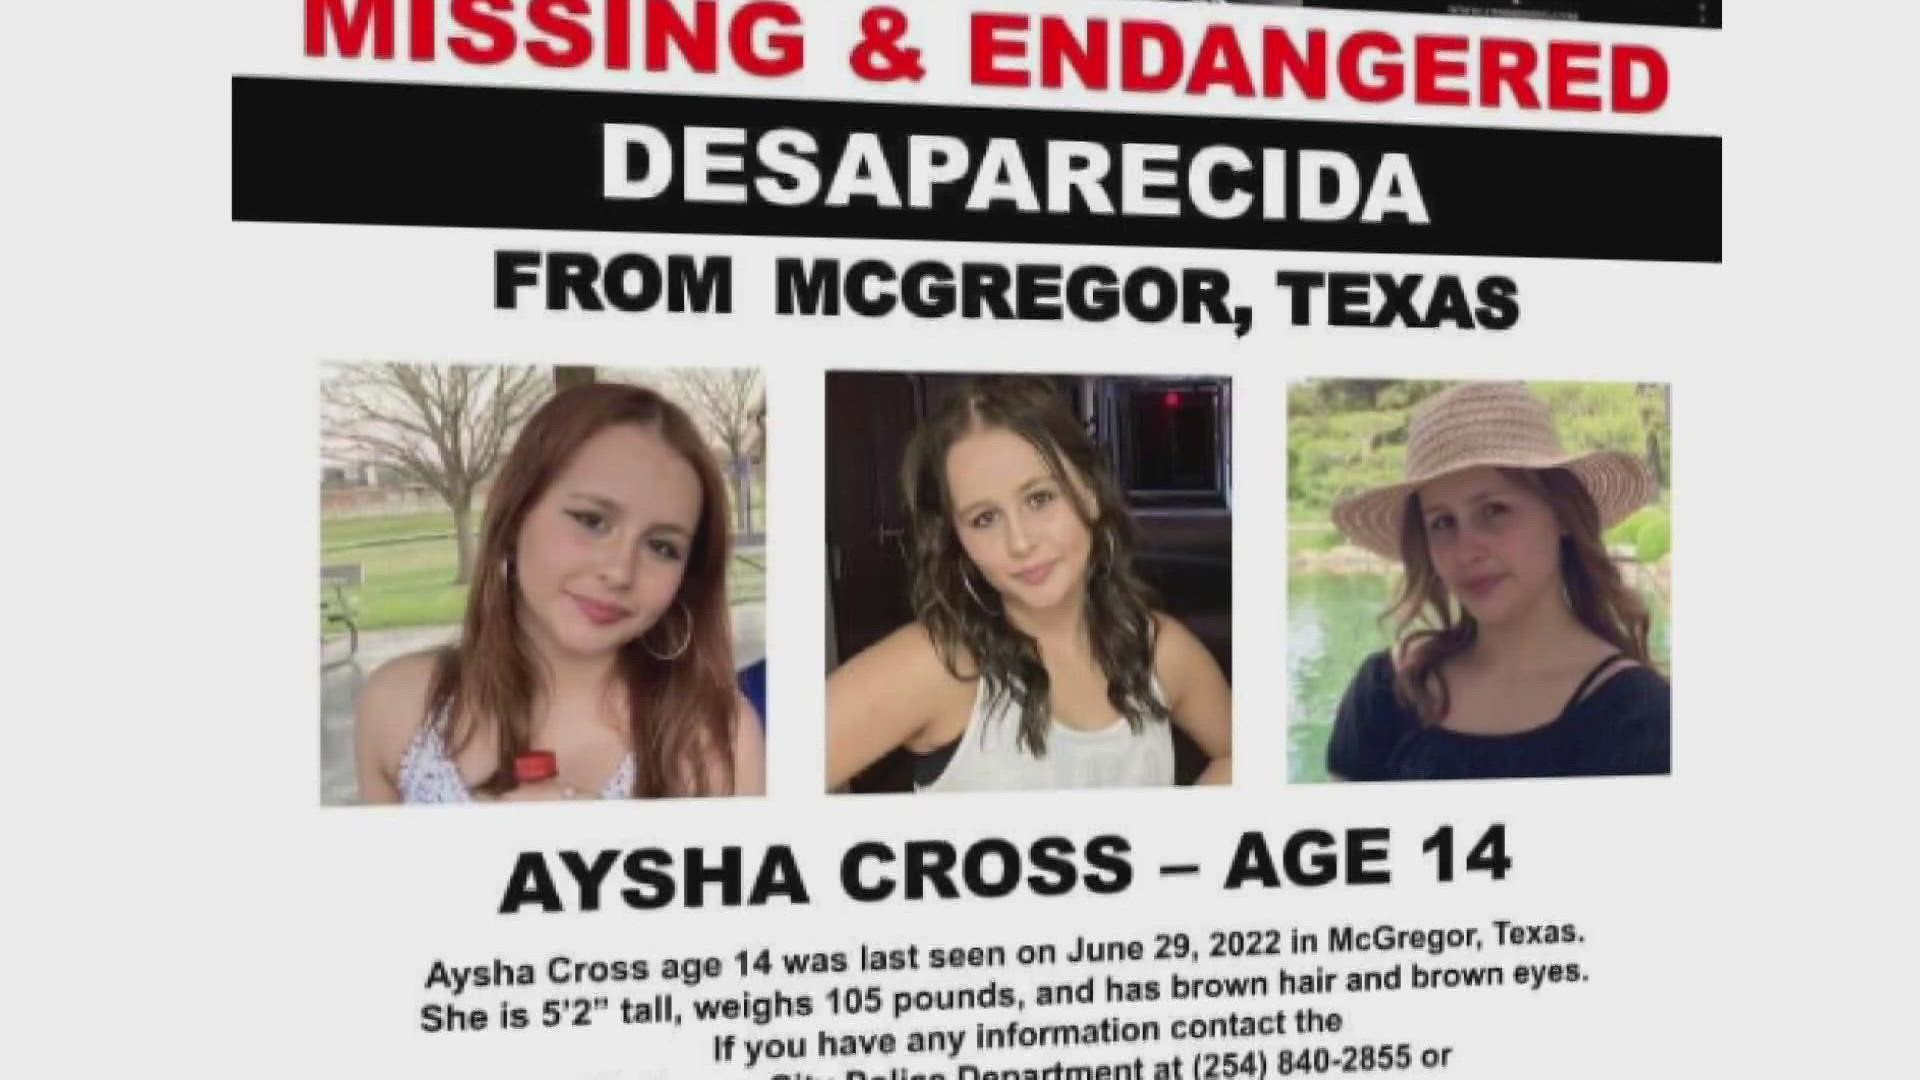 Emilee Solomon and Aysha Cross, both 14 years old, have reportedly been missing from McGregor since last Wednesday.